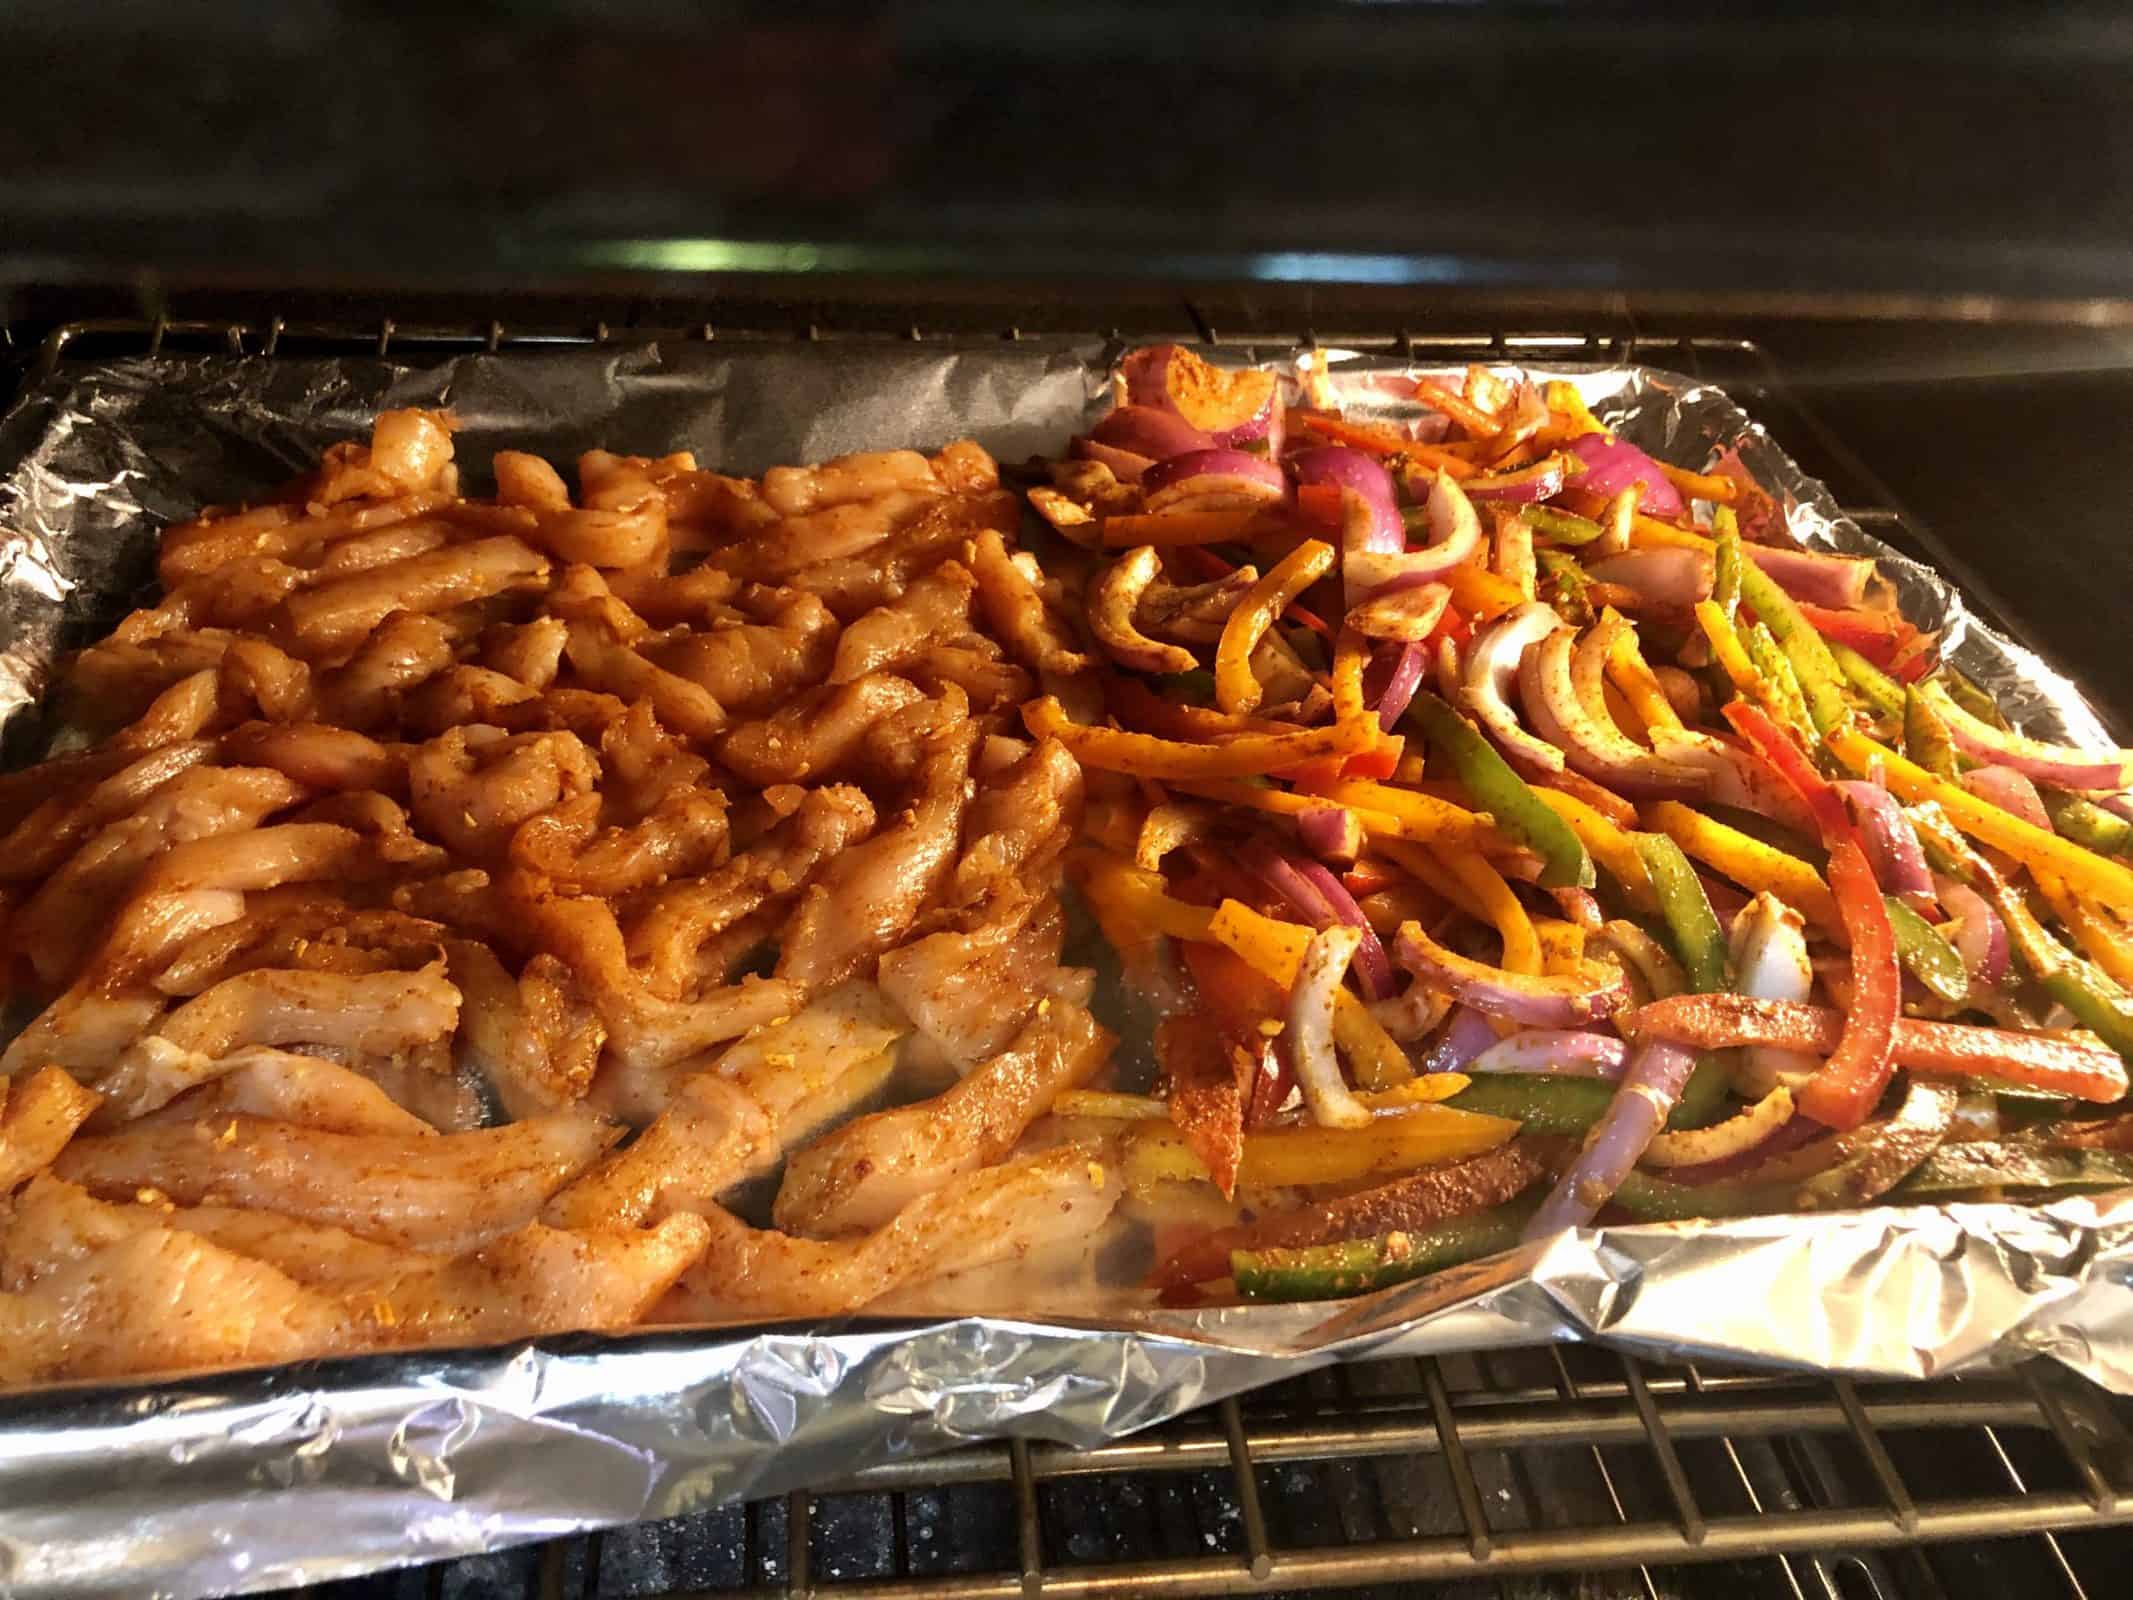 Chicken and Veggies in the Oven